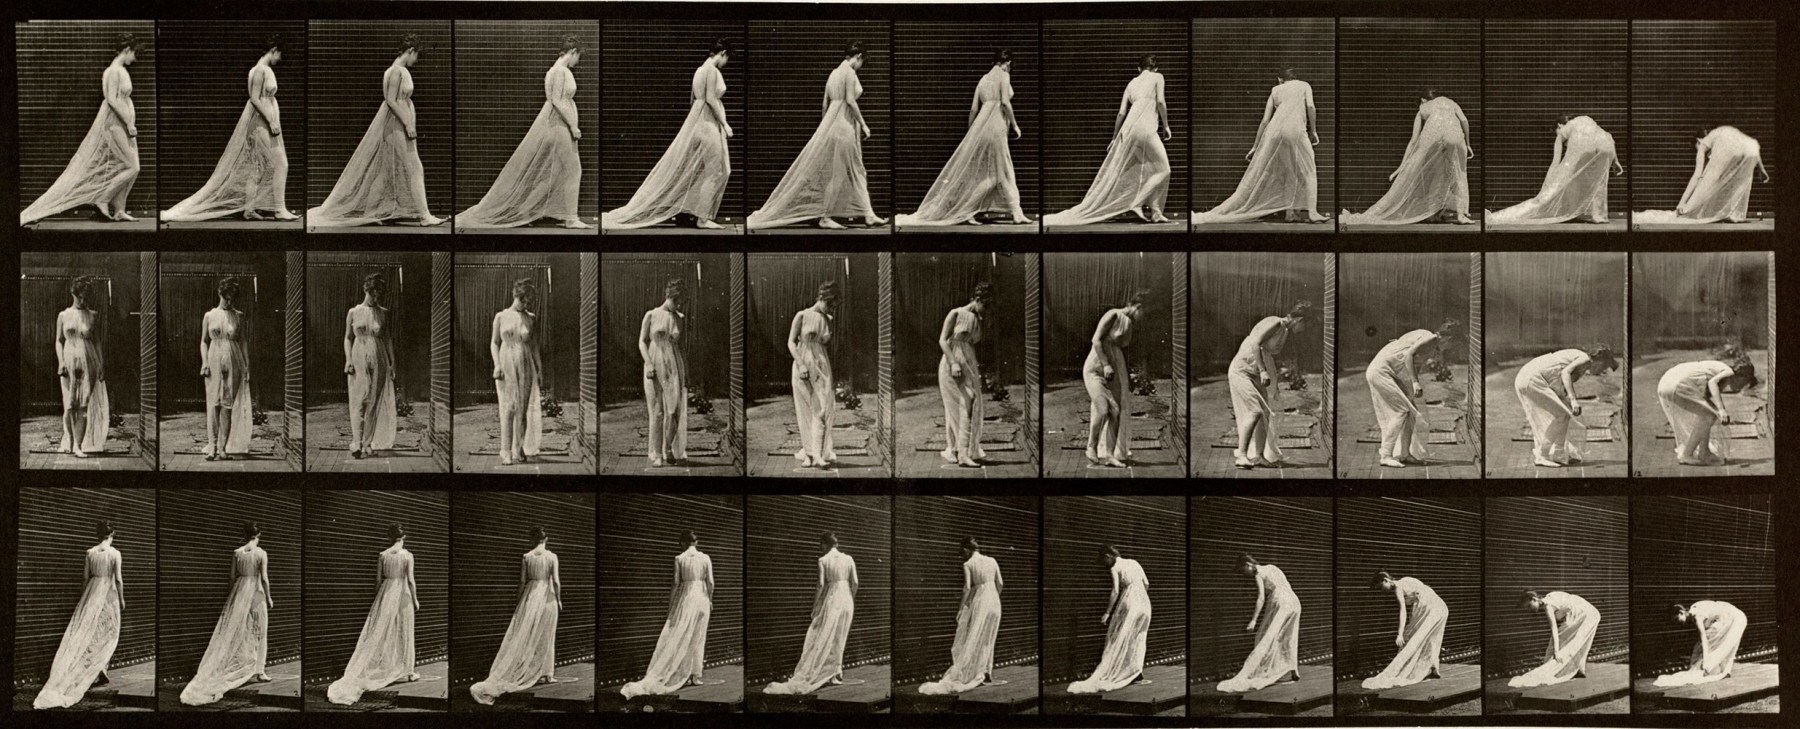 Sequence of black and white photos showing the movements of a 19th centory woman walking, and lifting up the train of her long dress